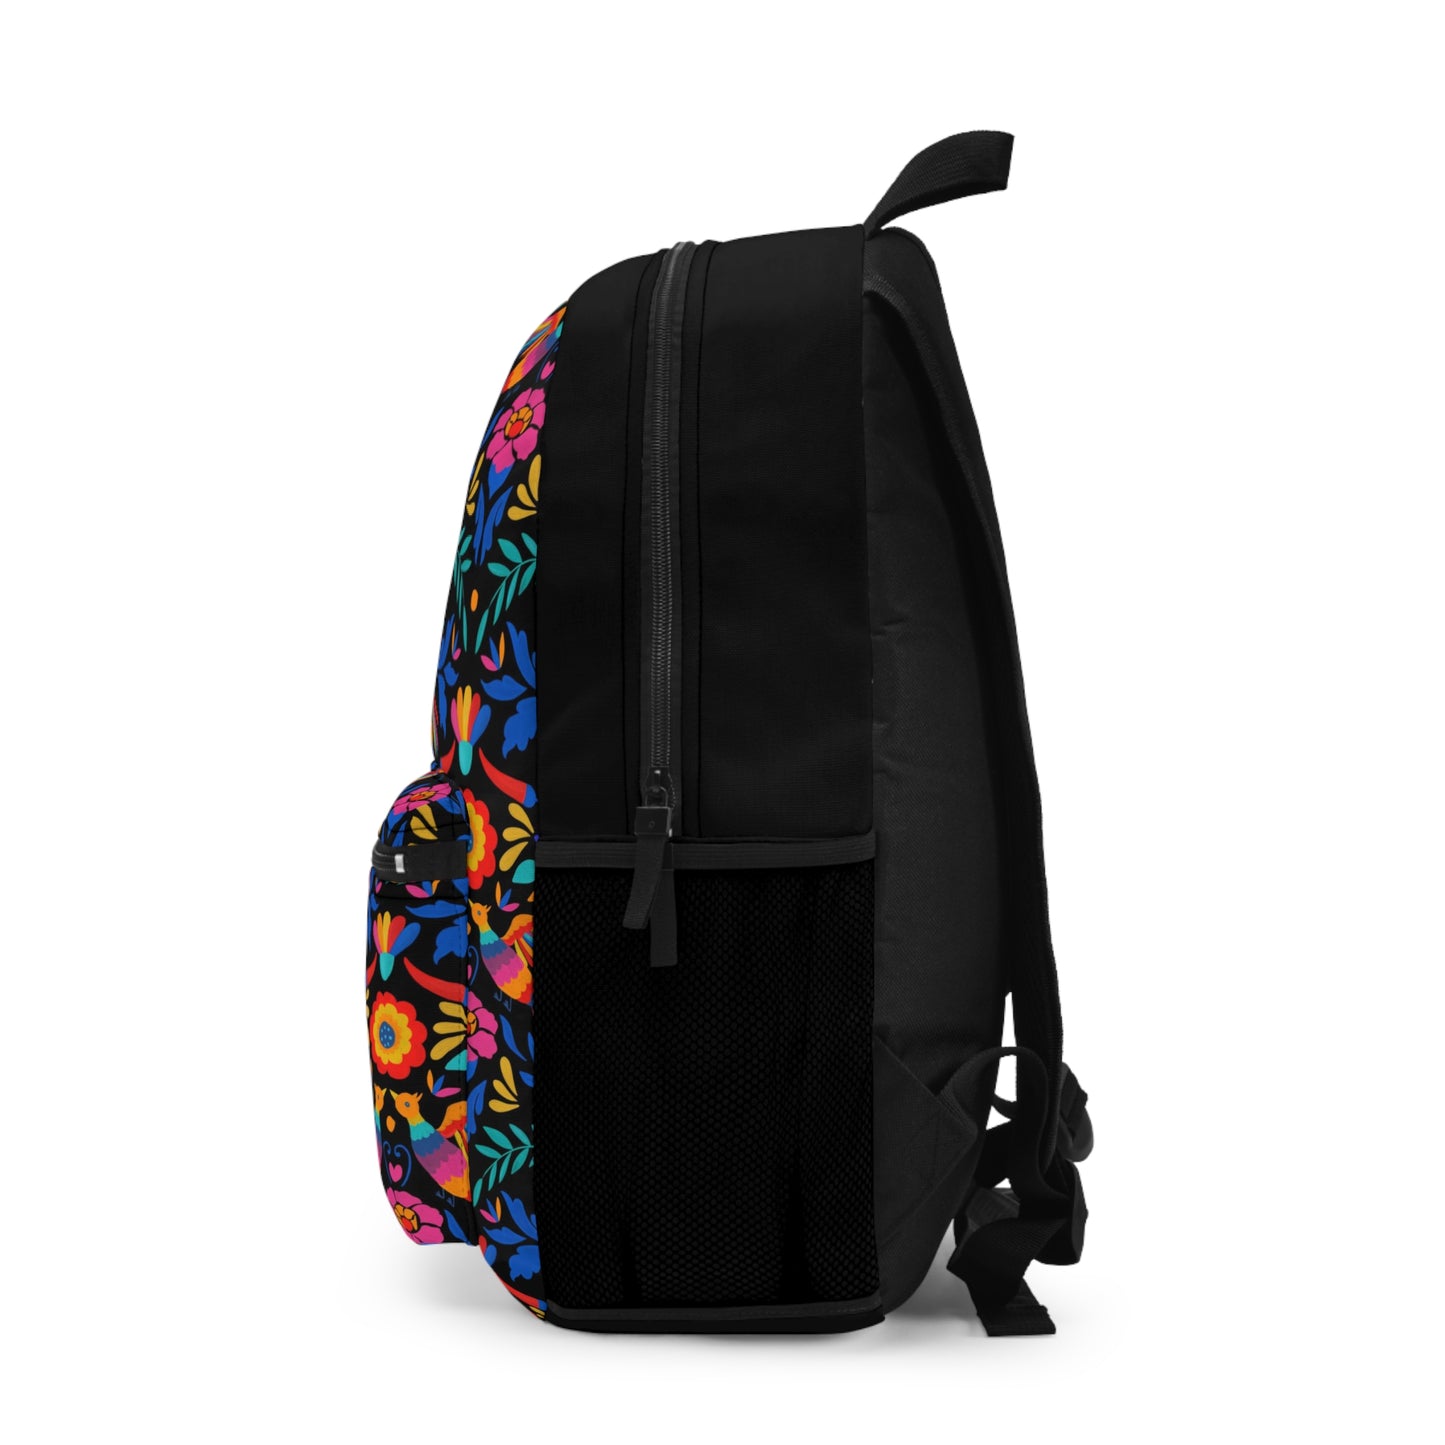 Mexican Backpack. Otomi Mexican Black and colorful back pack with Mexican art bag. Casual backpack for work, adventure or school.